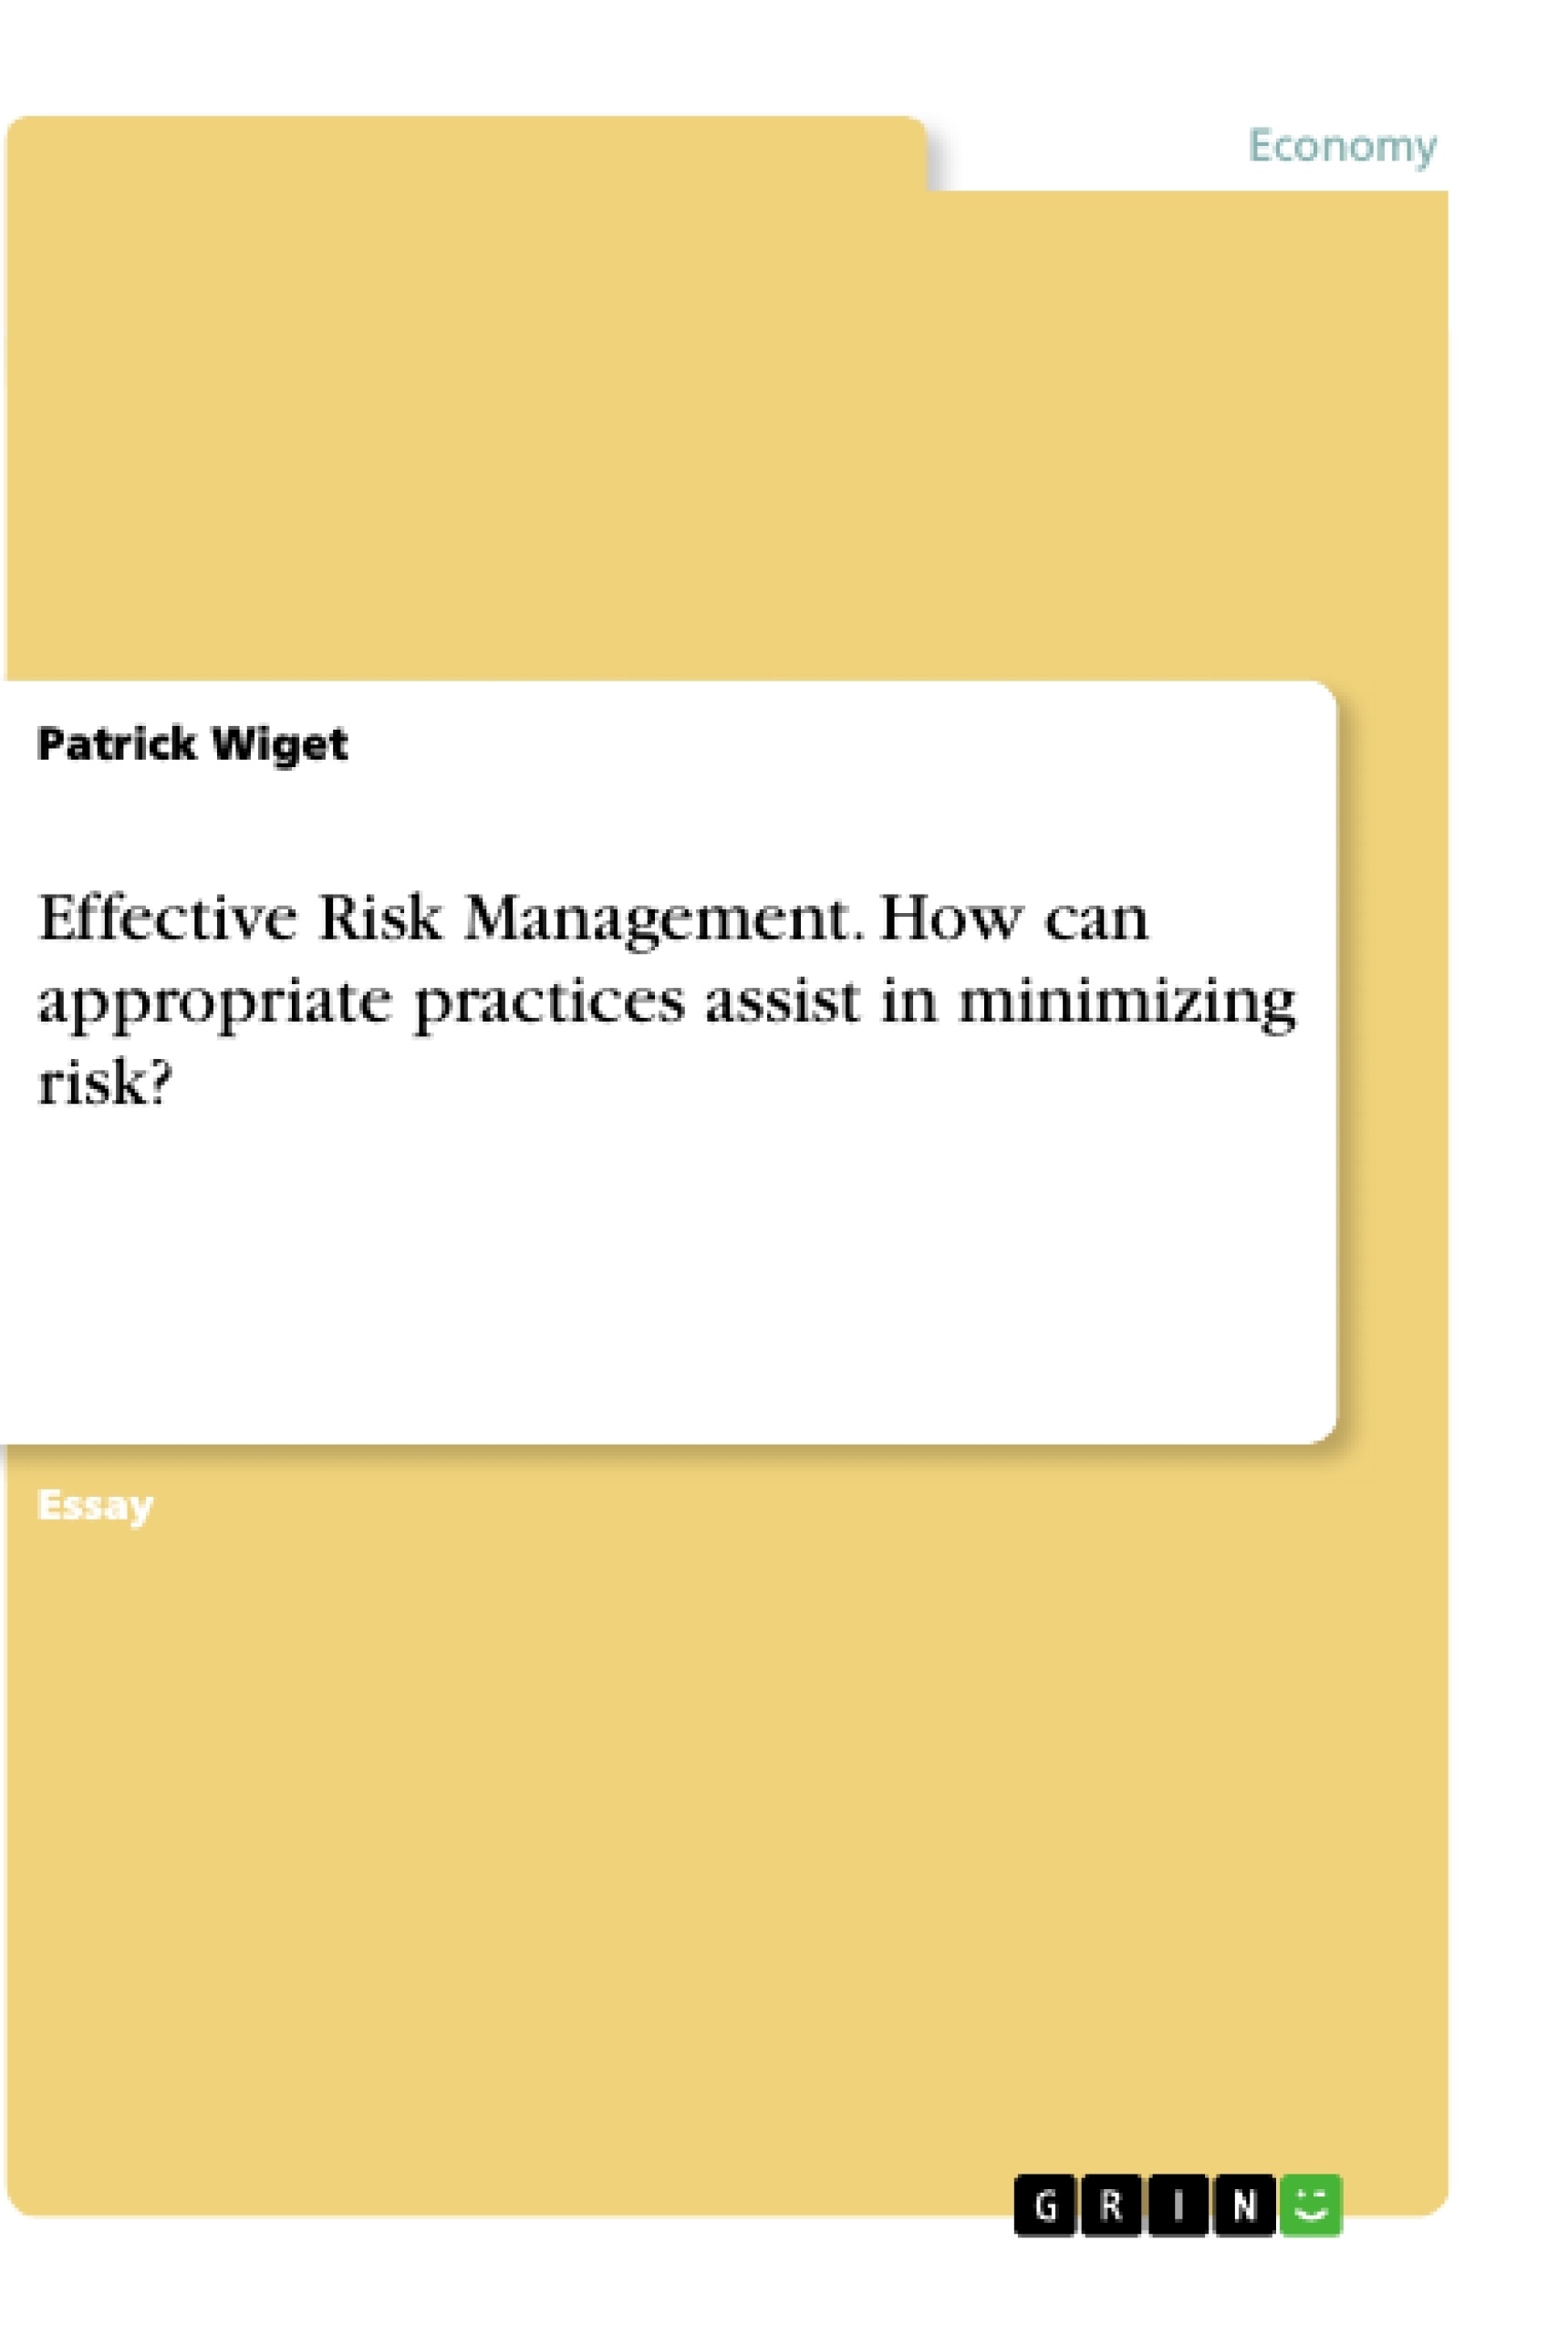 Title: Effective Risk Management. How can appropriate practices assist in minimizing risk?